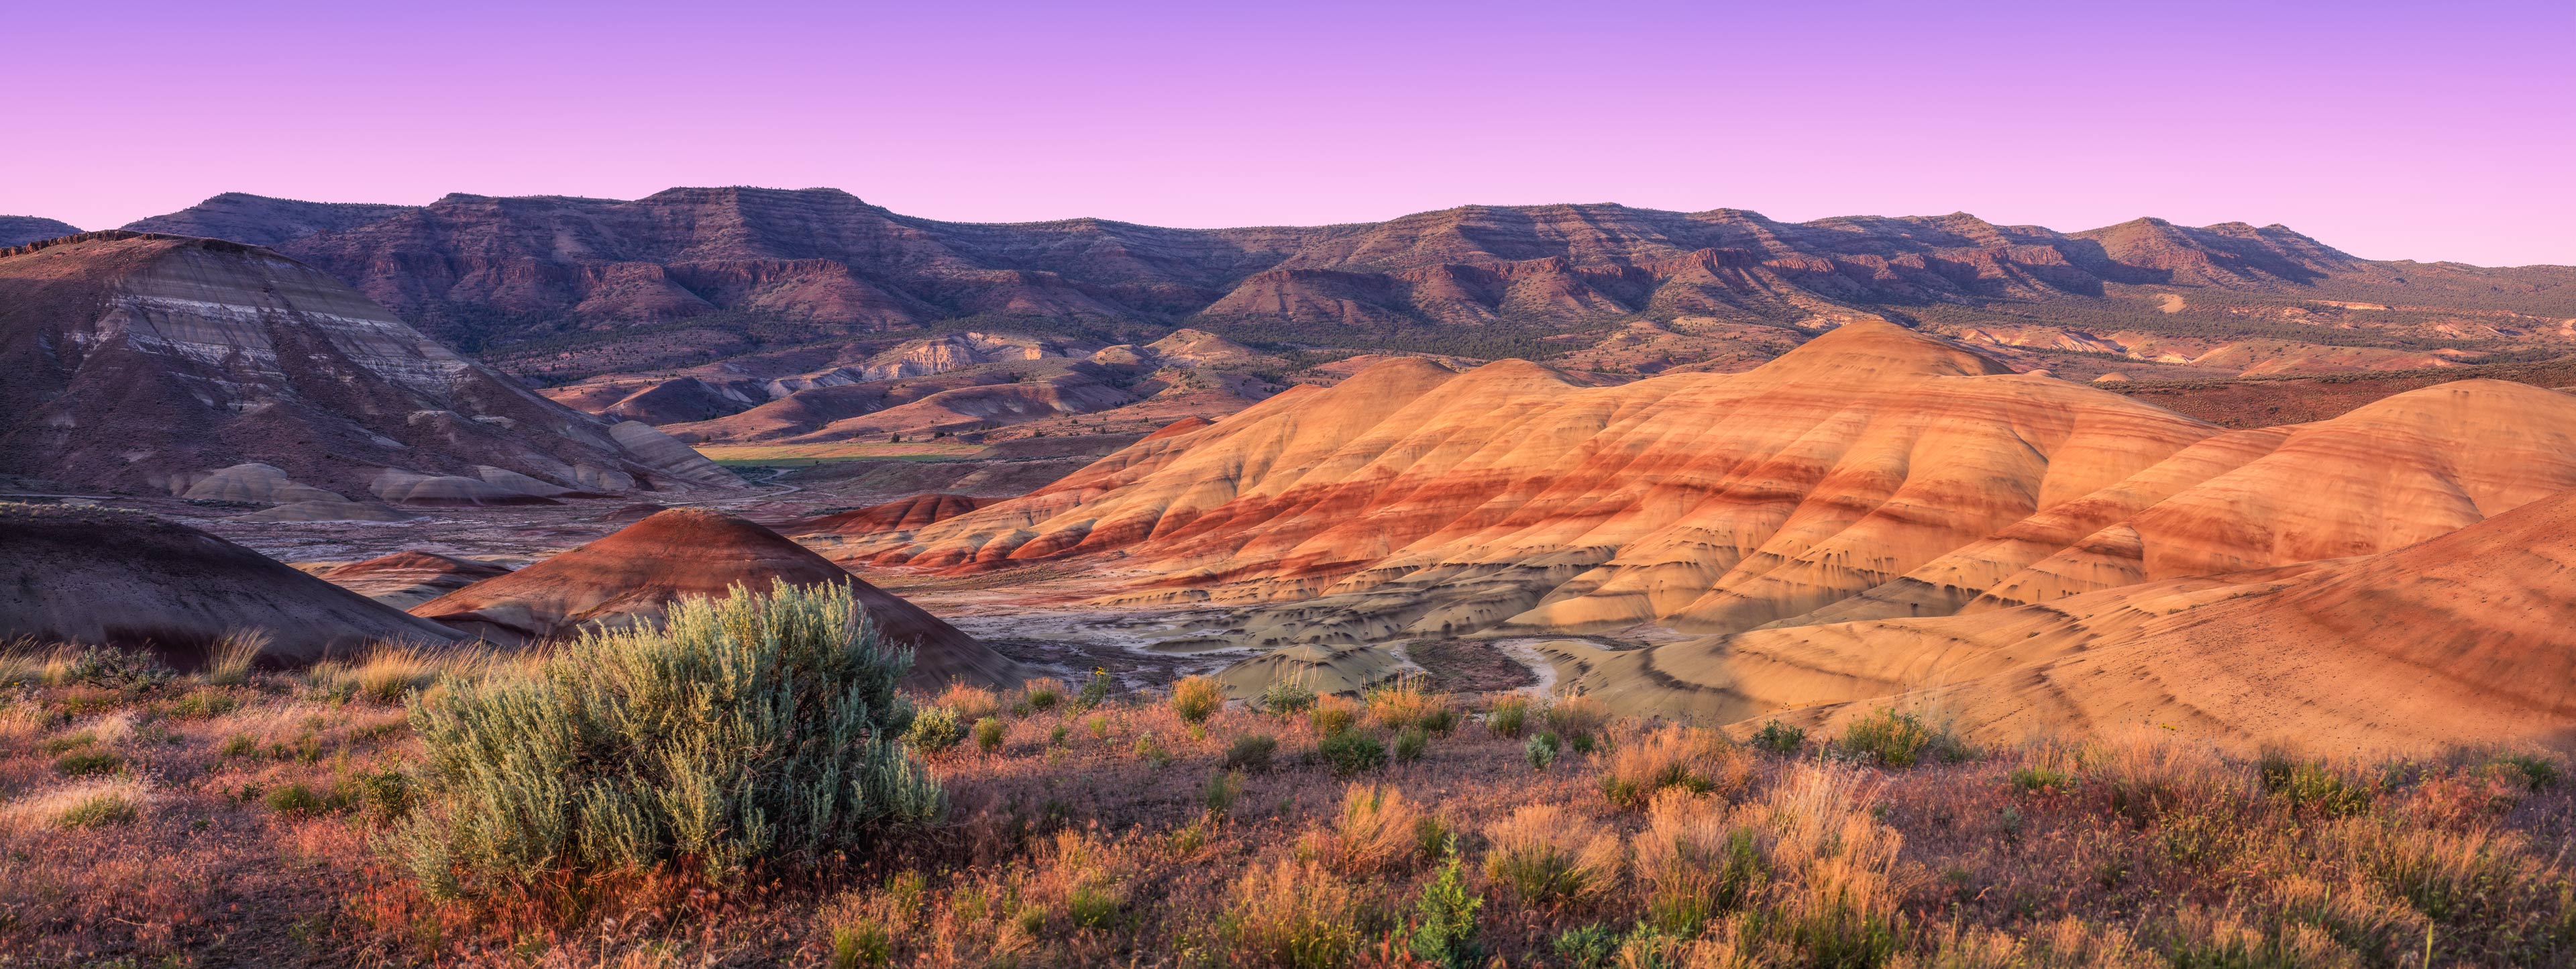 John Day Fossil Beds National Monument, Painted Hills Unit, Oregon USA